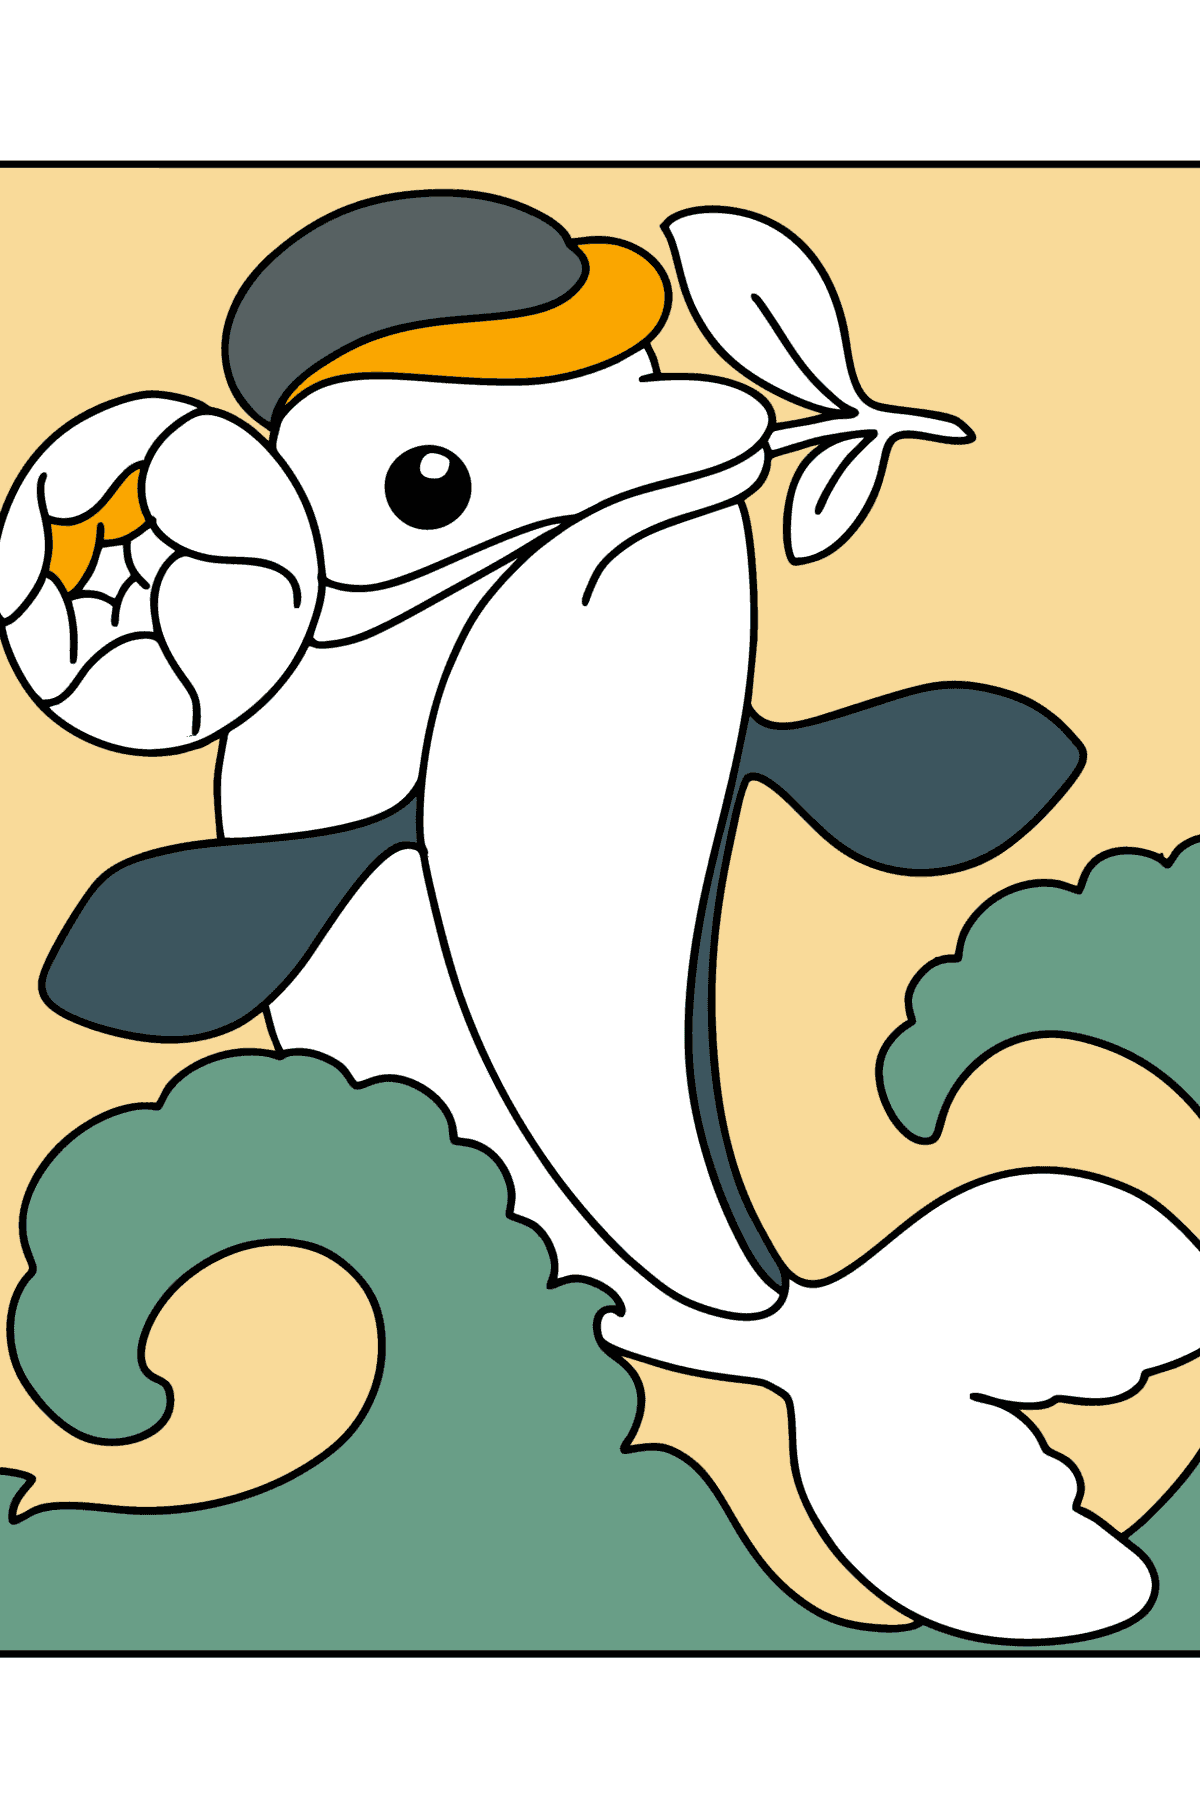 Cute Dolphin coloring page - Coloring Pages for Kids